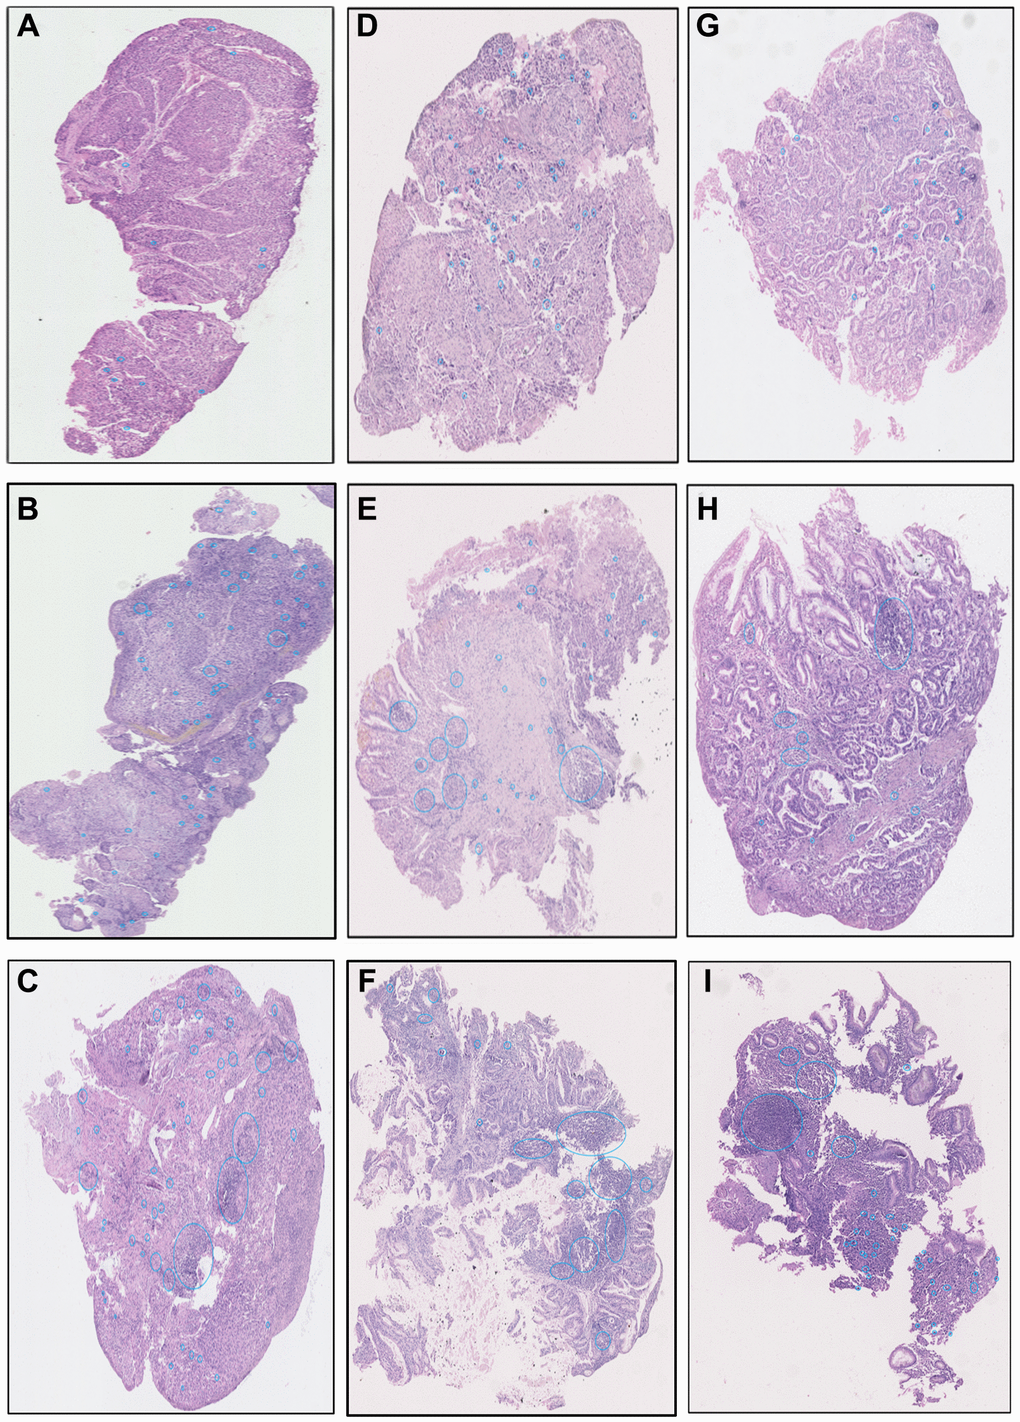 The examples images of low, medium, and high TILs intensity in ESCC (A–C), AEGJ (D–F), and GAC (G–I) H&E-stained tissue sections (H&E×200).